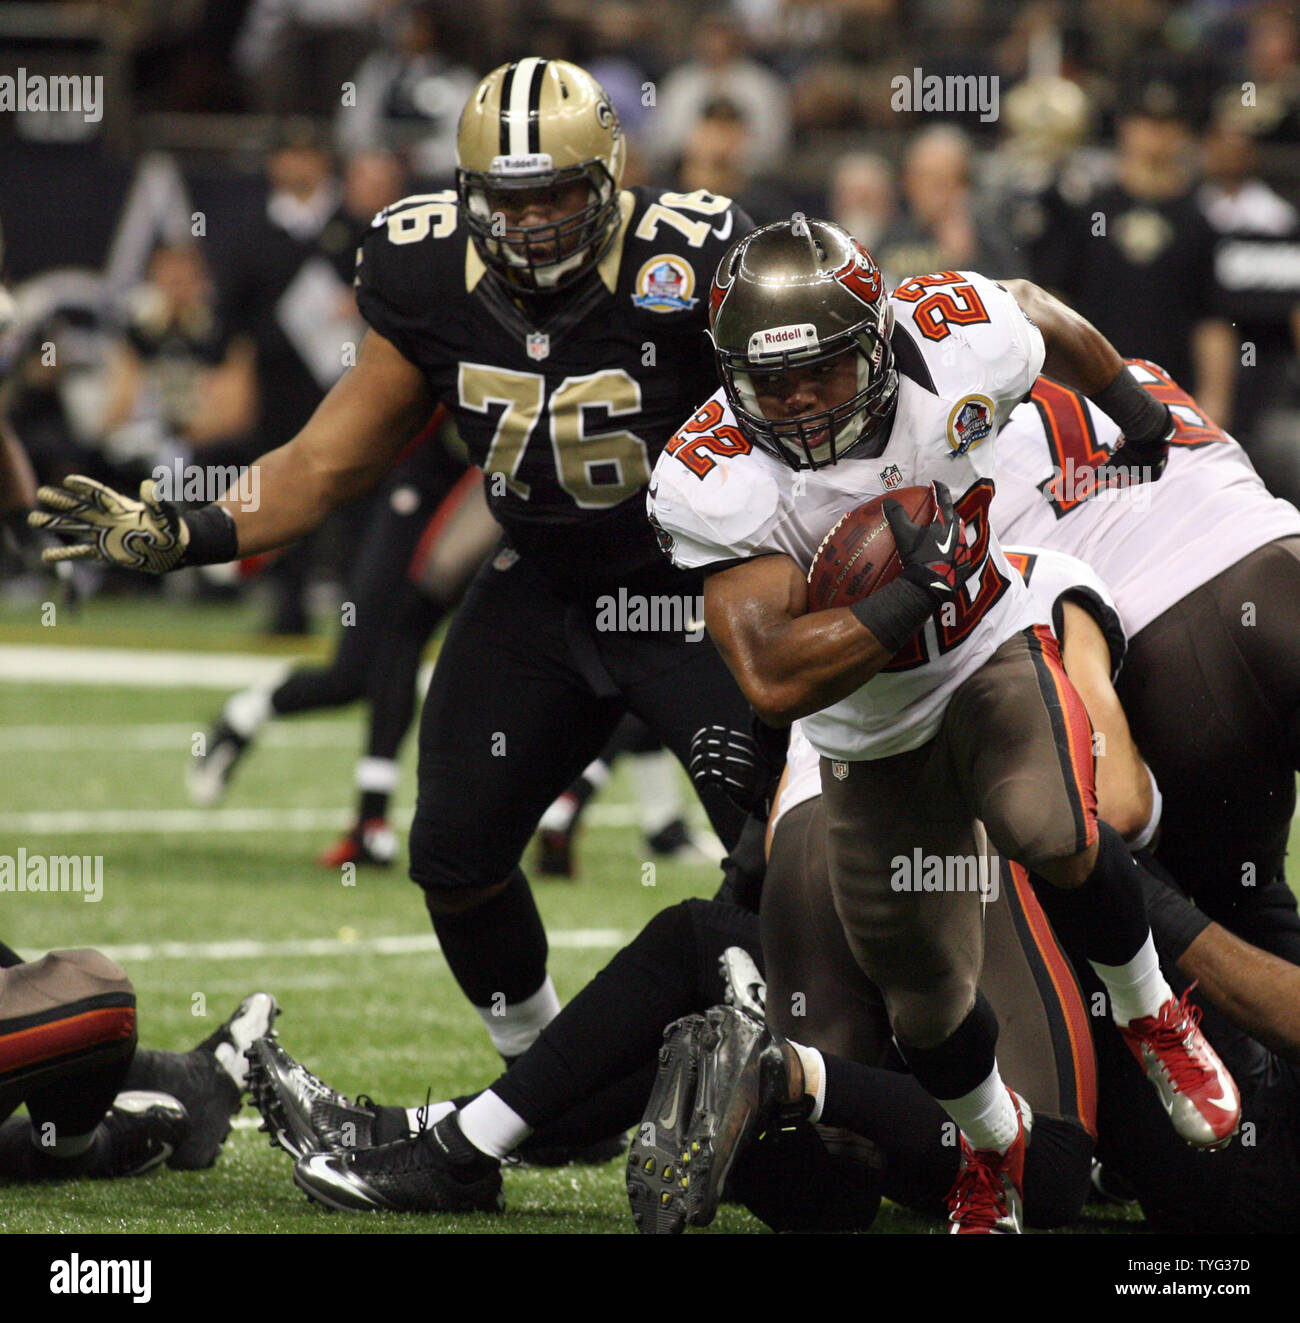 Tampa Bay Buccaneers running back Doug Martin (22) is chased through the  backfield by New Orleans Saints defensive tackle Akiem Hicks (76) at the  Mercedes-Benz Superdome in New Orleans, Louisiana on December